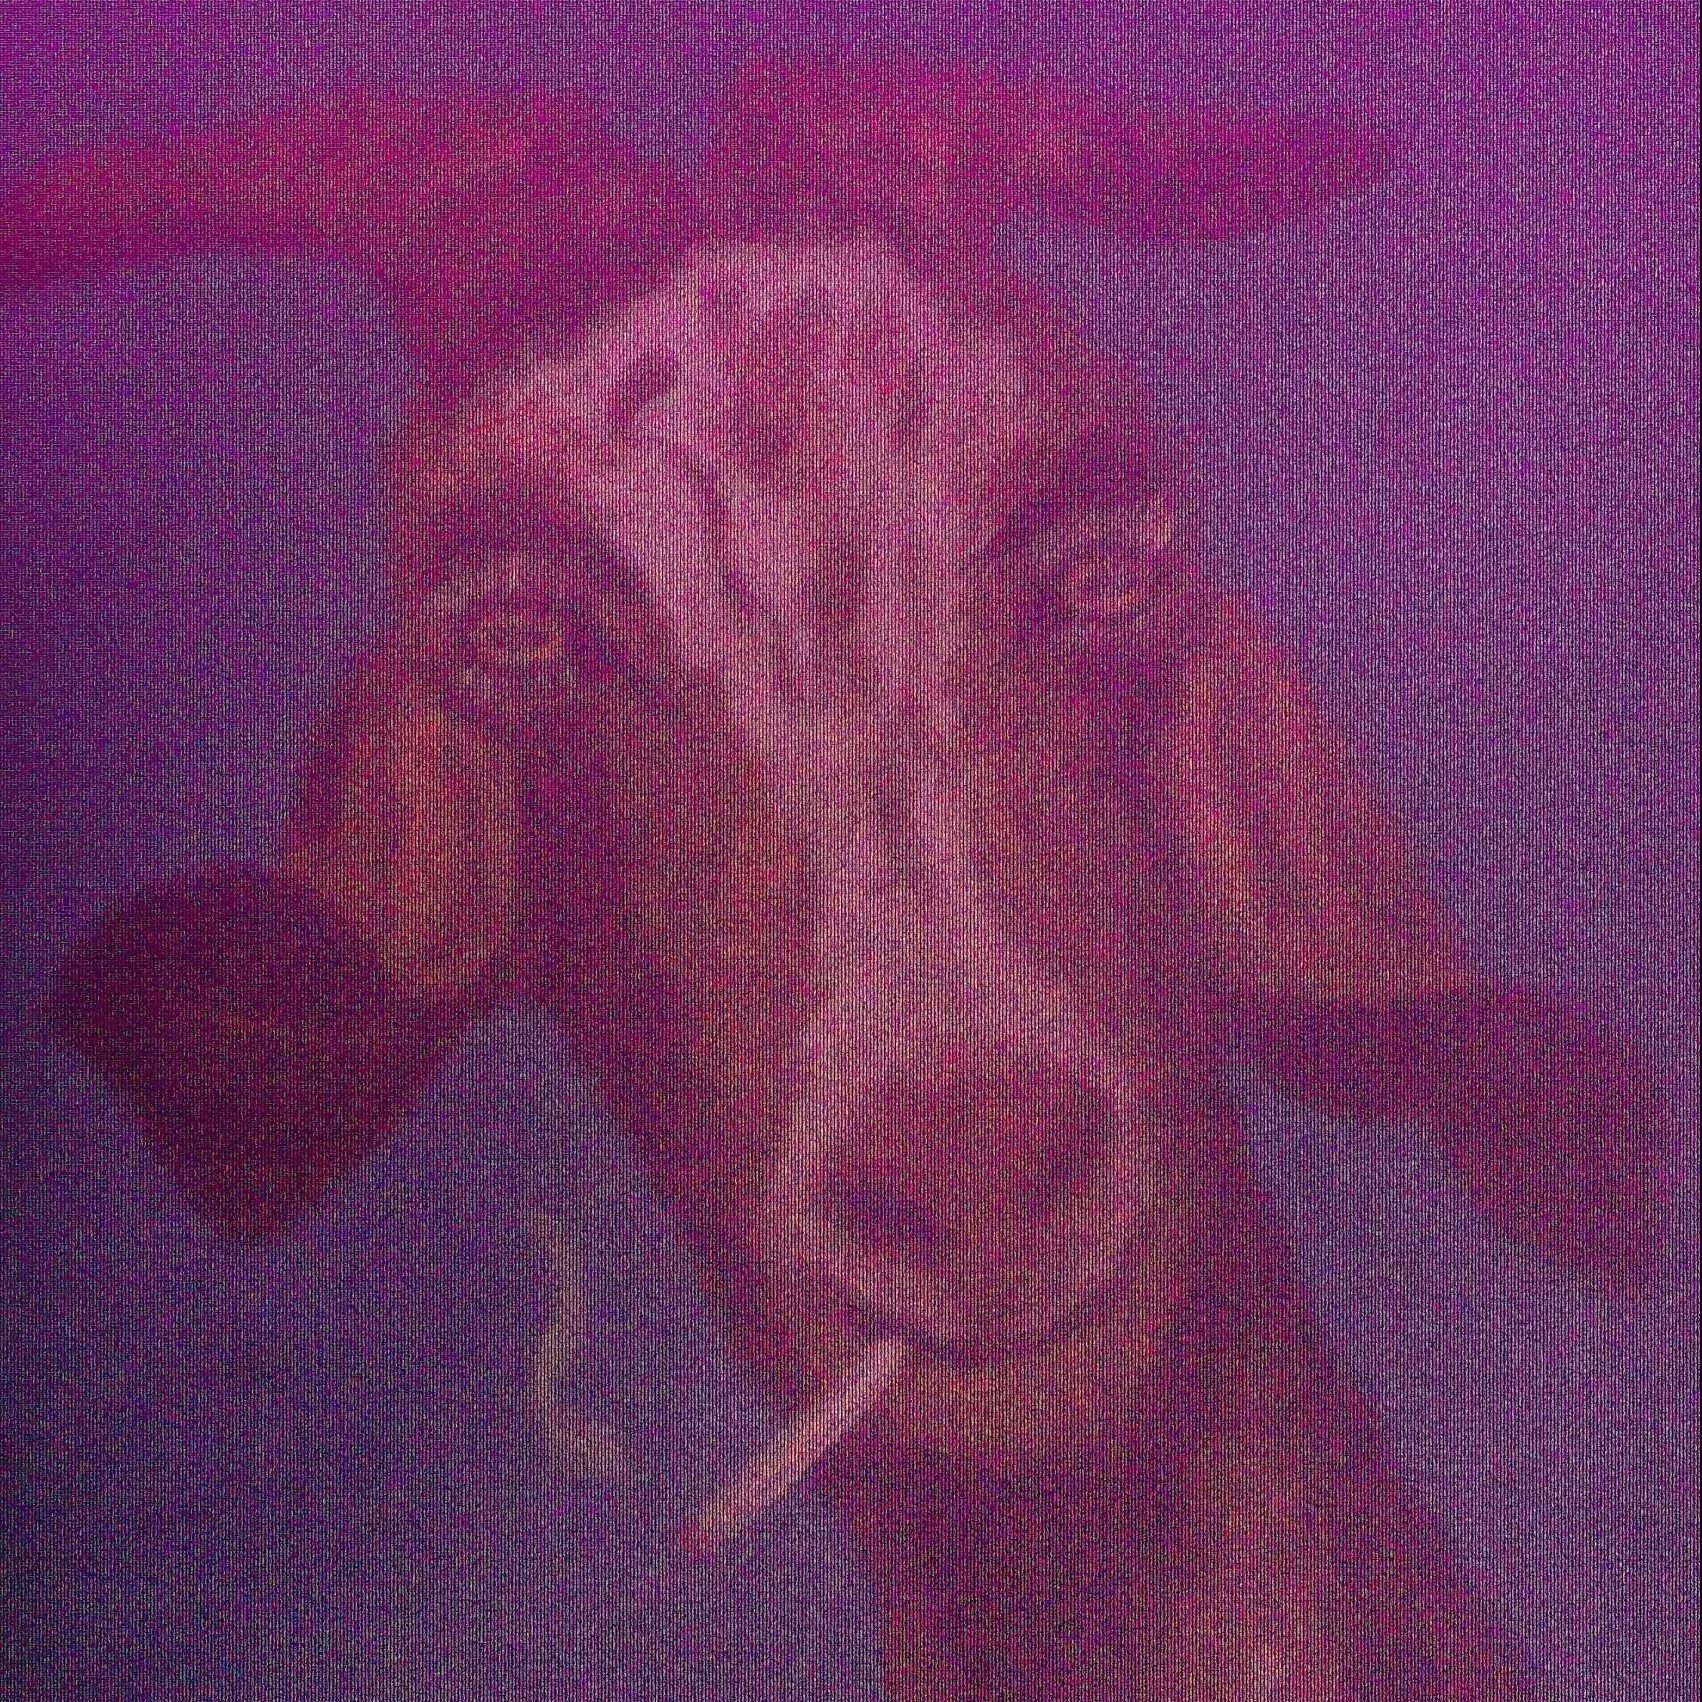 Sample photo taken with the Schrodinger Glitch Camera of a painting of a smoking goat